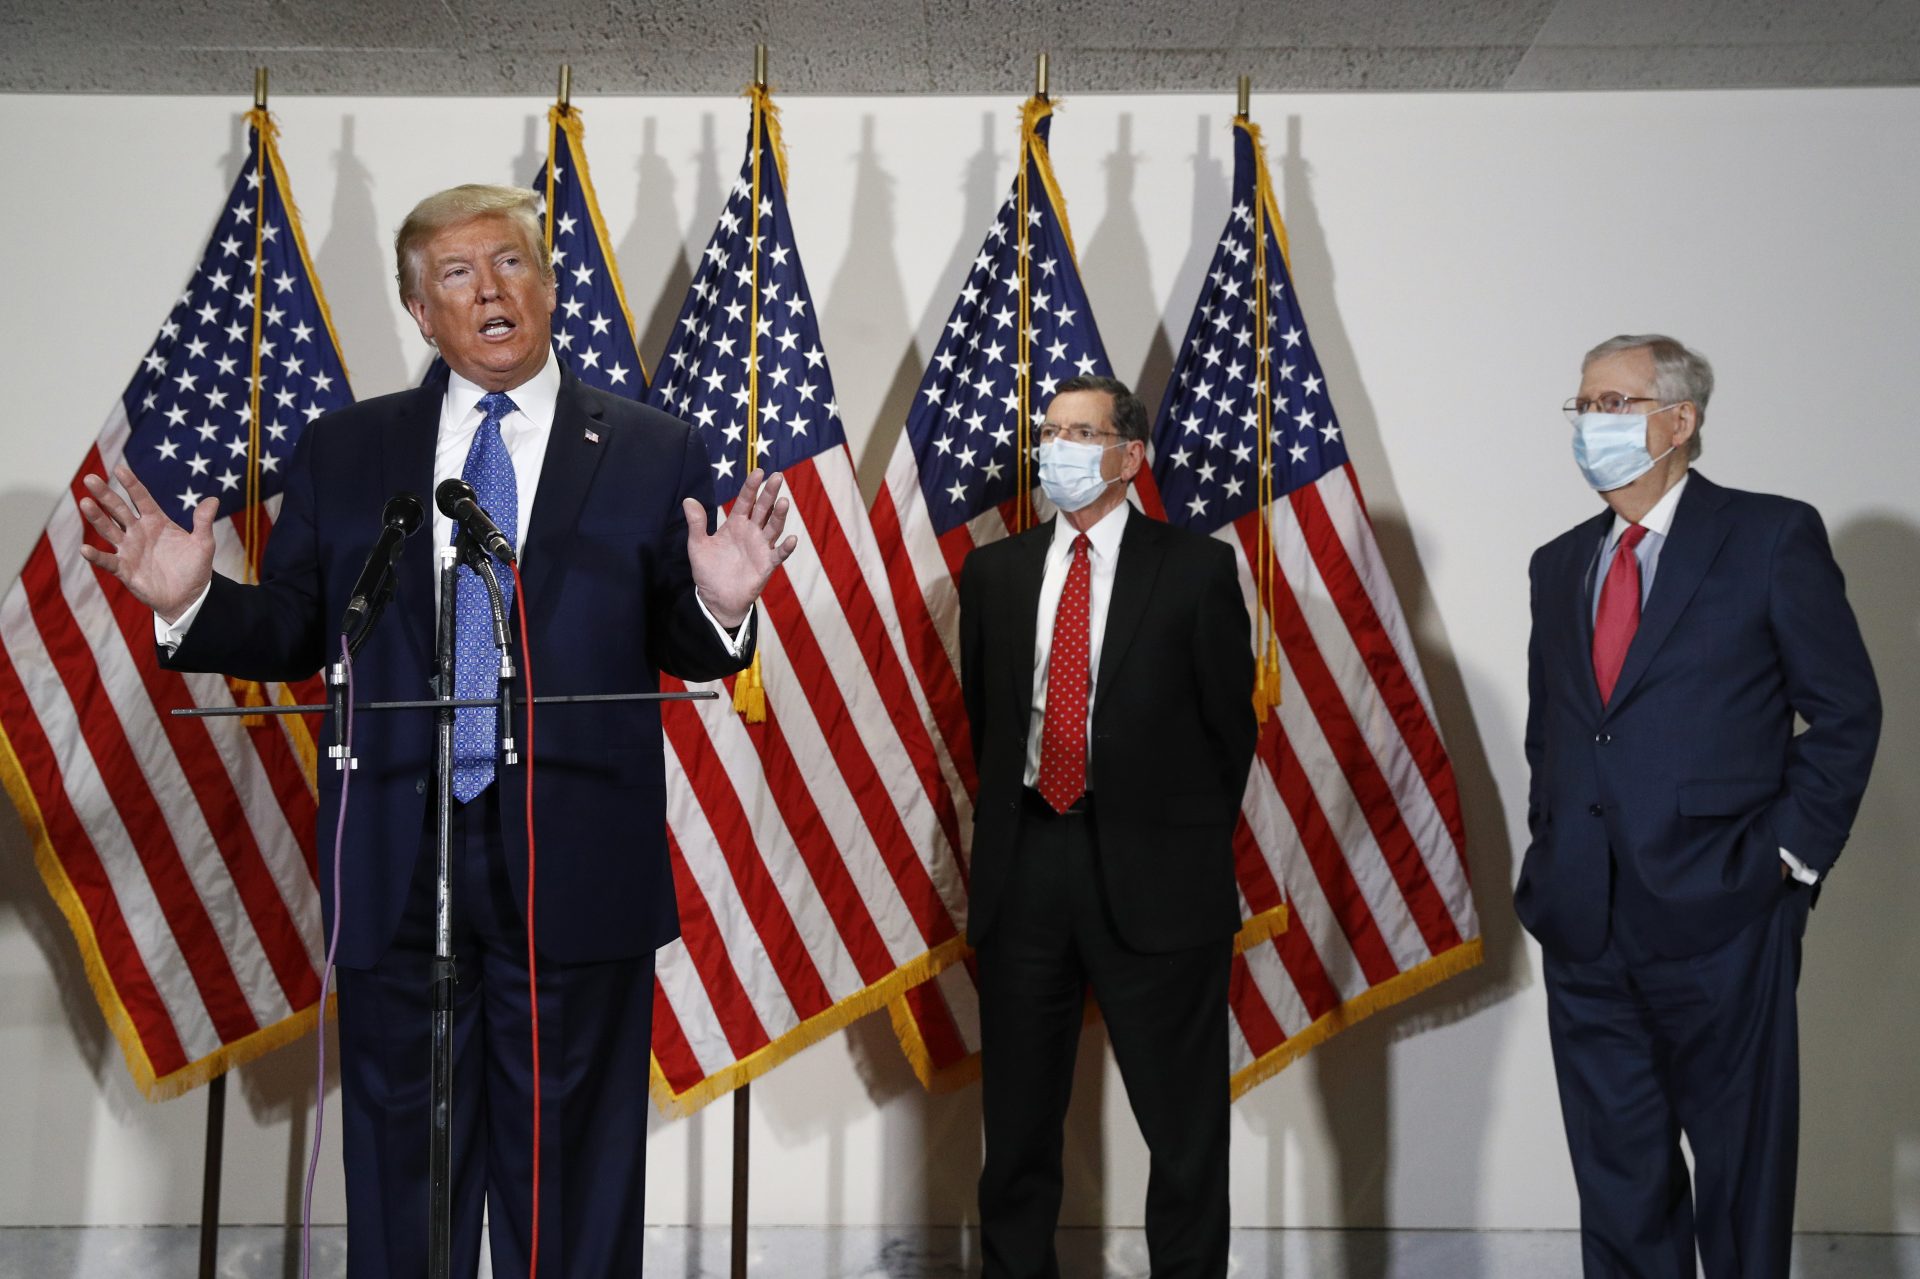 President Trump speaks to reporters May 19 after meeting with Senate Republicans at their weekly luncheon on Capitol Hill. Sen. John Barrasso, R-Wyo., and Senate Majority Leader Mitch McConnell stand behind Trump.